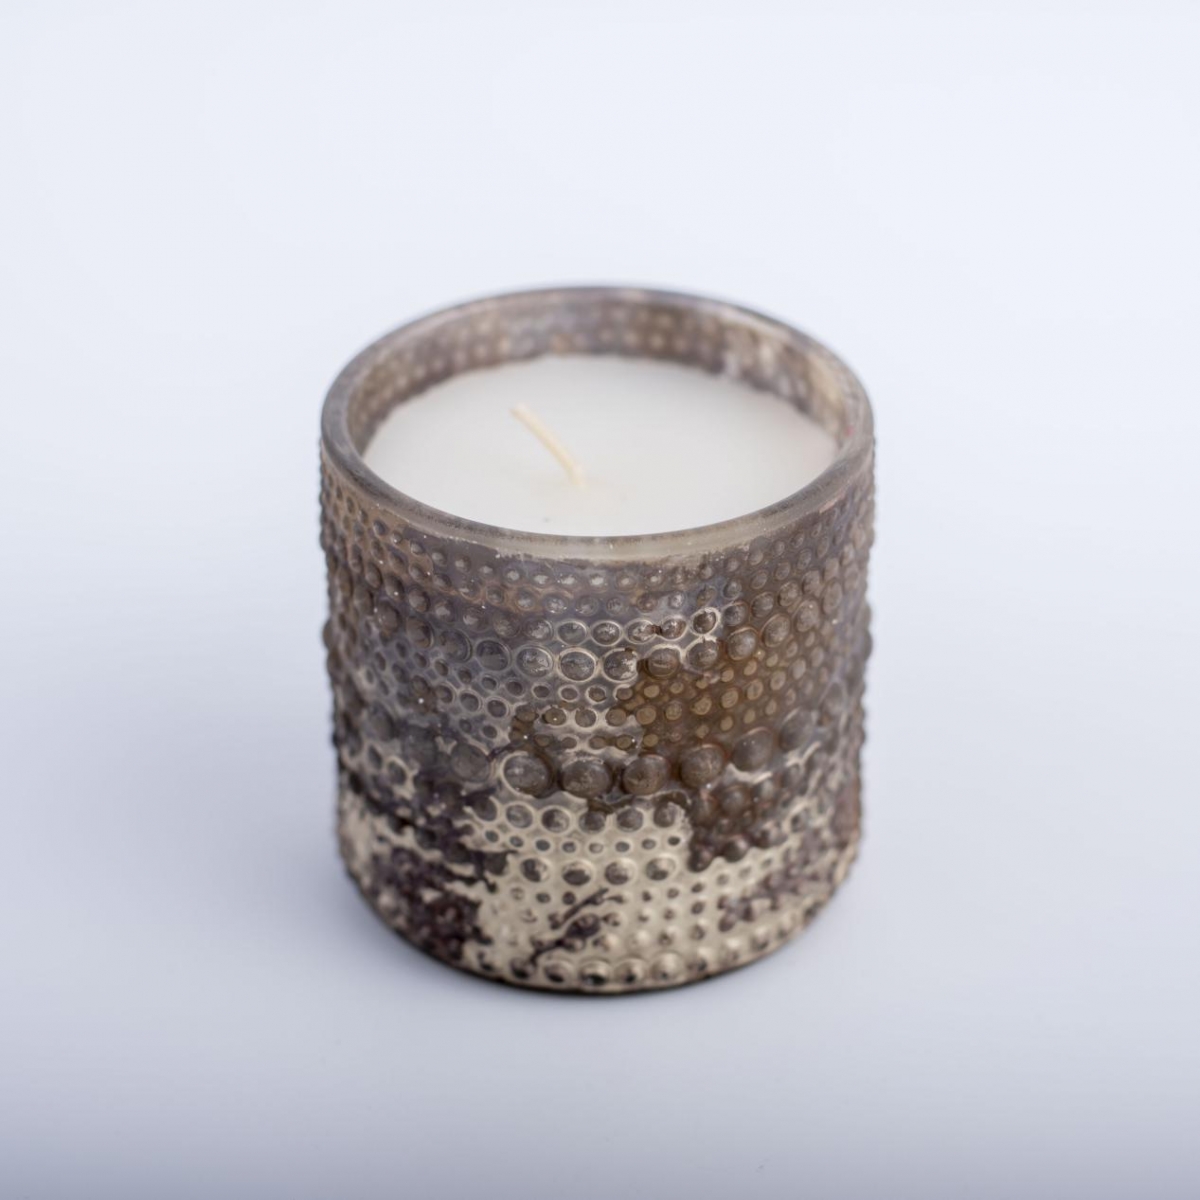 Natural Candles -Retro Style ,Soy Wax ,Essential Oils ,Scented Candles , Dots Embossed Glass Jar, China Factory ,Price-HOWCANDLE-Candles,Scented Candles,Aromatherapy Candles,Soy Candles,Vegan Candles,Jar Candles,Pillar Candles,Candle Gift Sets,Essential Oils,Reed Diffuser,Candle Holder,